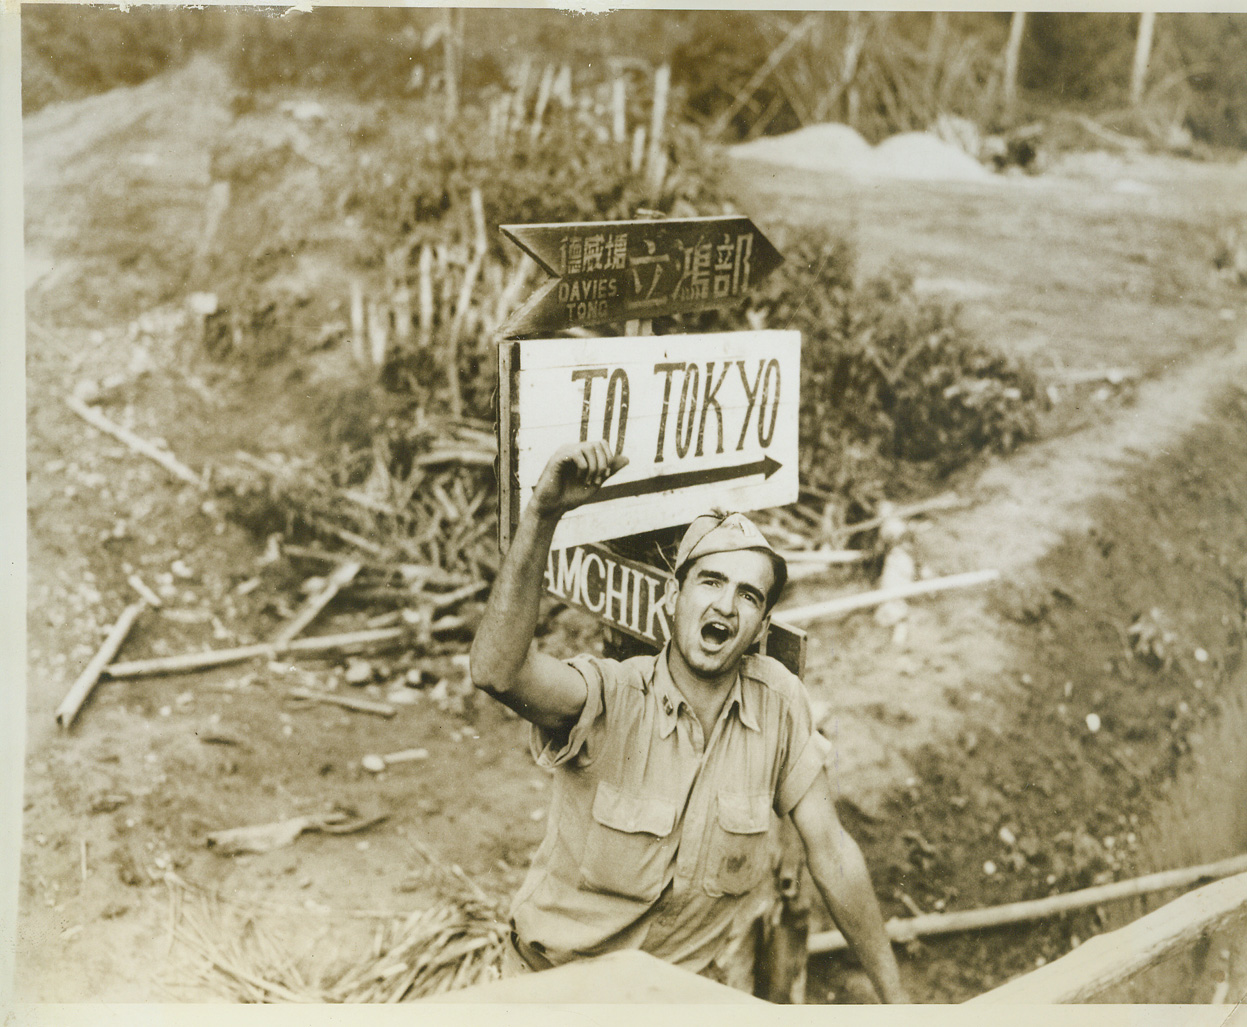 New Burma Road - Shortcut to Tokyo, 9/28/1943. ASSAM, India - Captain John E. Moyer, of Tuskegee, Ala., one of many U.S. Army Engineers working on a new branch of the Burma Road, points out the direction which United Nations moving over the road, will eventually take - to Tokyo. The road starts at Assam, will cross the North Burma border and on into Central Burma, where it will connect with the Old Burma road, now blocked by Jap occupation. The new road was begun last December.;